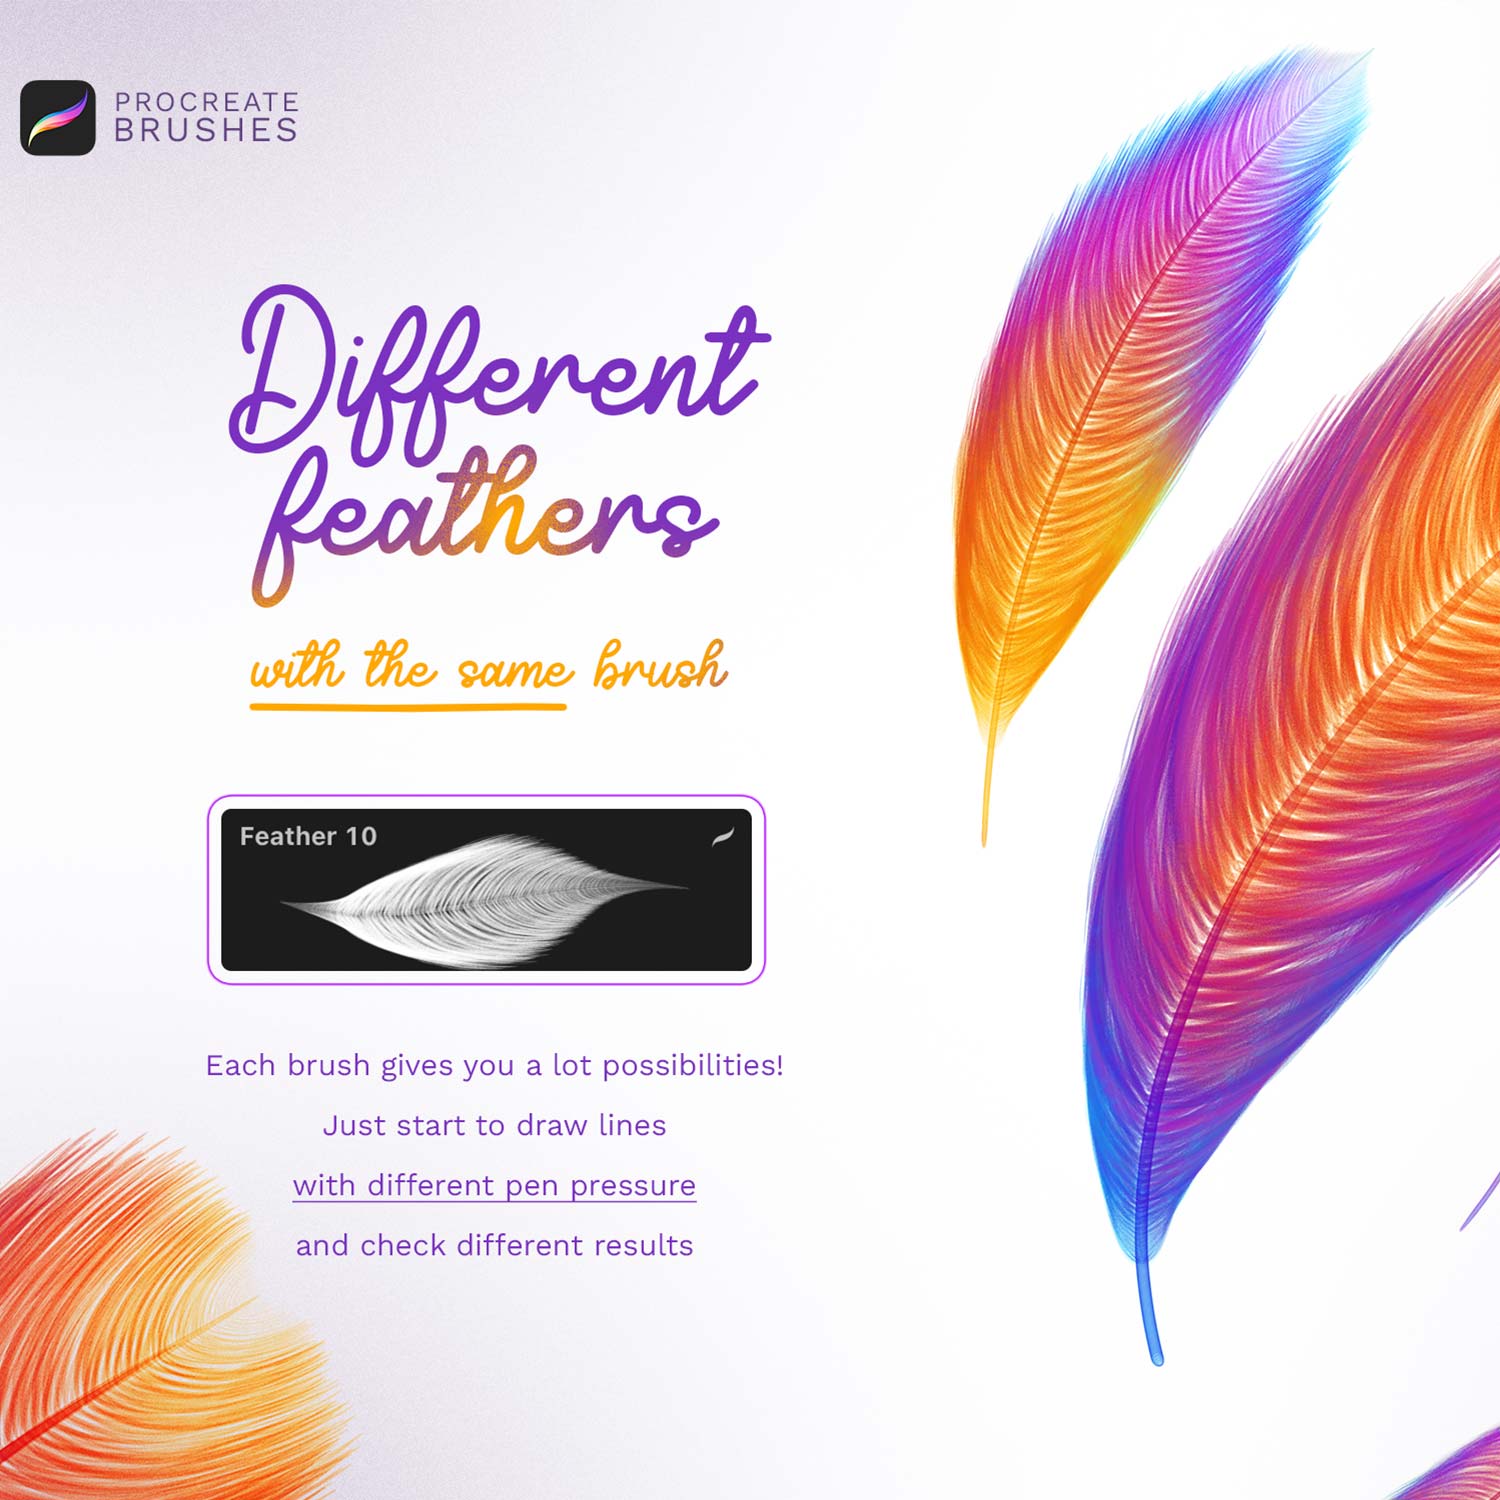 Feathers Procreate Brushes preview image.